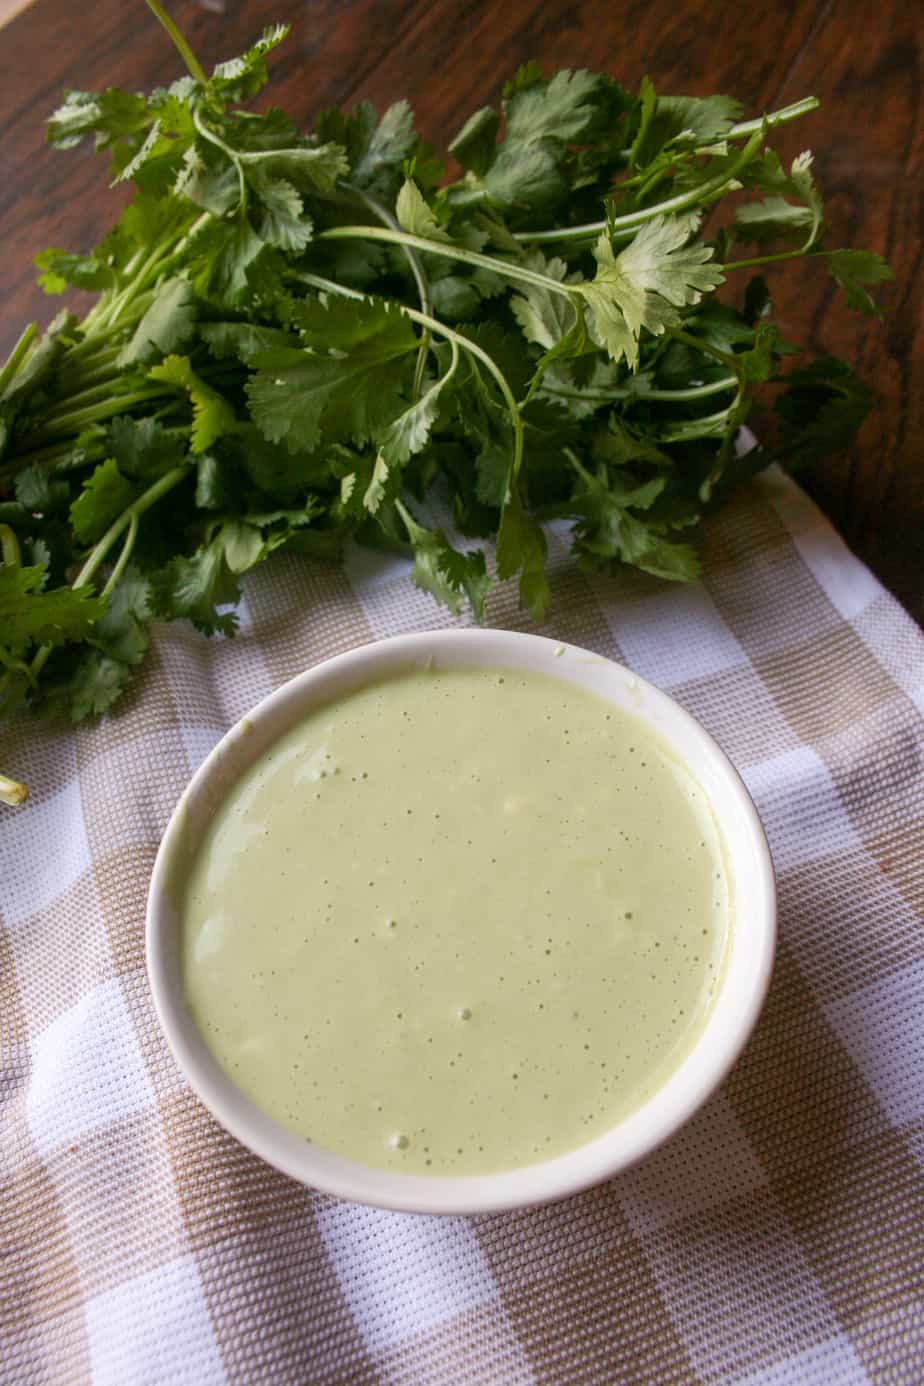 Garlic Cilantro Sauce is the perfect spread for sandwiches or dressing for salads. So yummy!